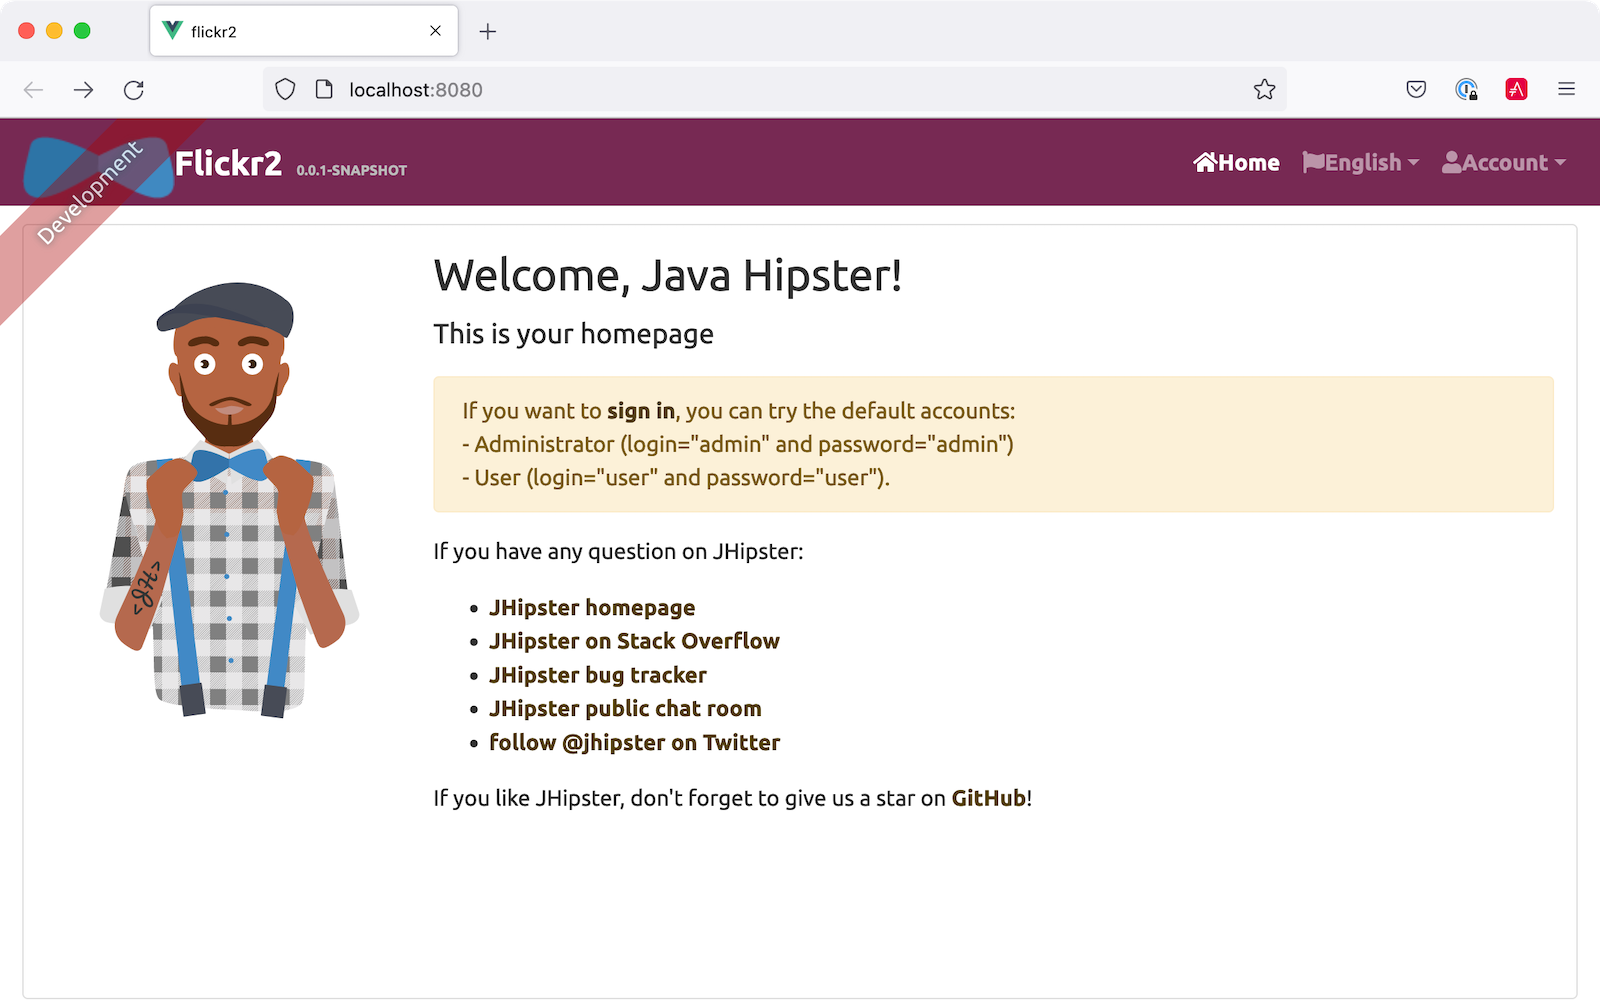 Full Stack Java with React, Spring Boot, and JHipster